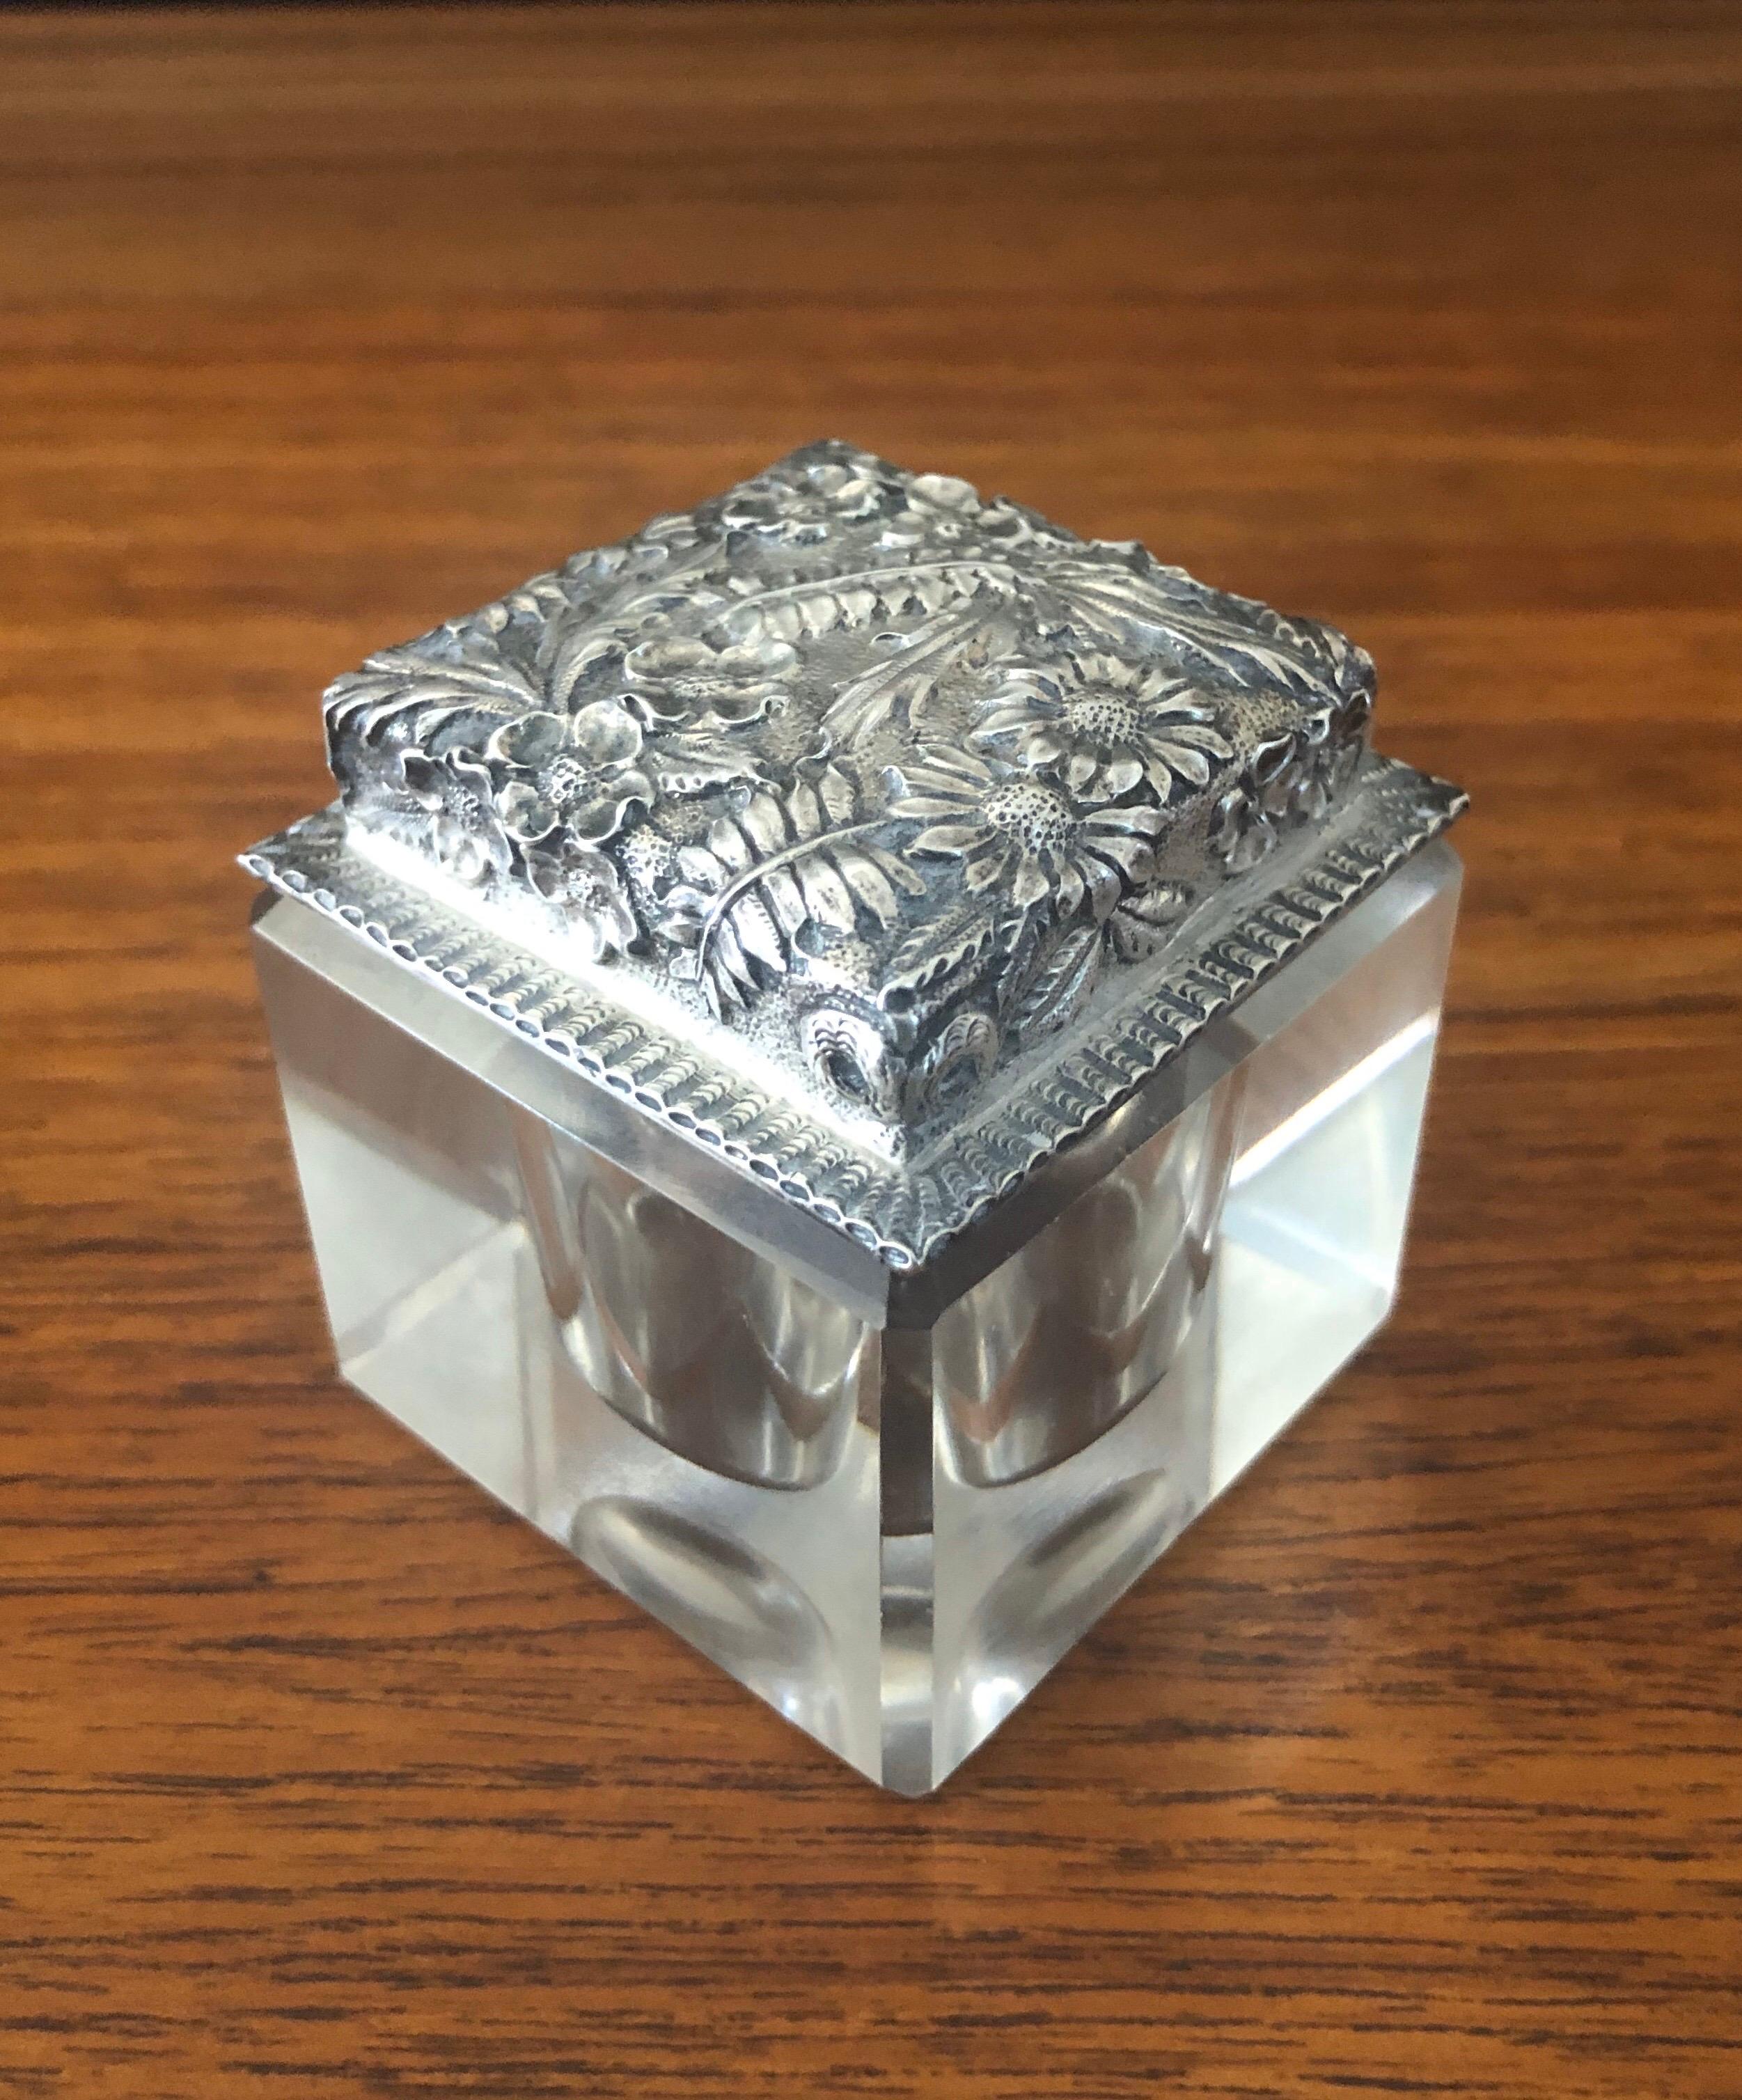 A rare antique hand-hammered repousse lid sterling silver inkwell by Jacobi & Jenkins of Baltimore, circa 1900. The inkwell has a removable domed sterling repousse lid in a floral pattern which sits on a 2.25